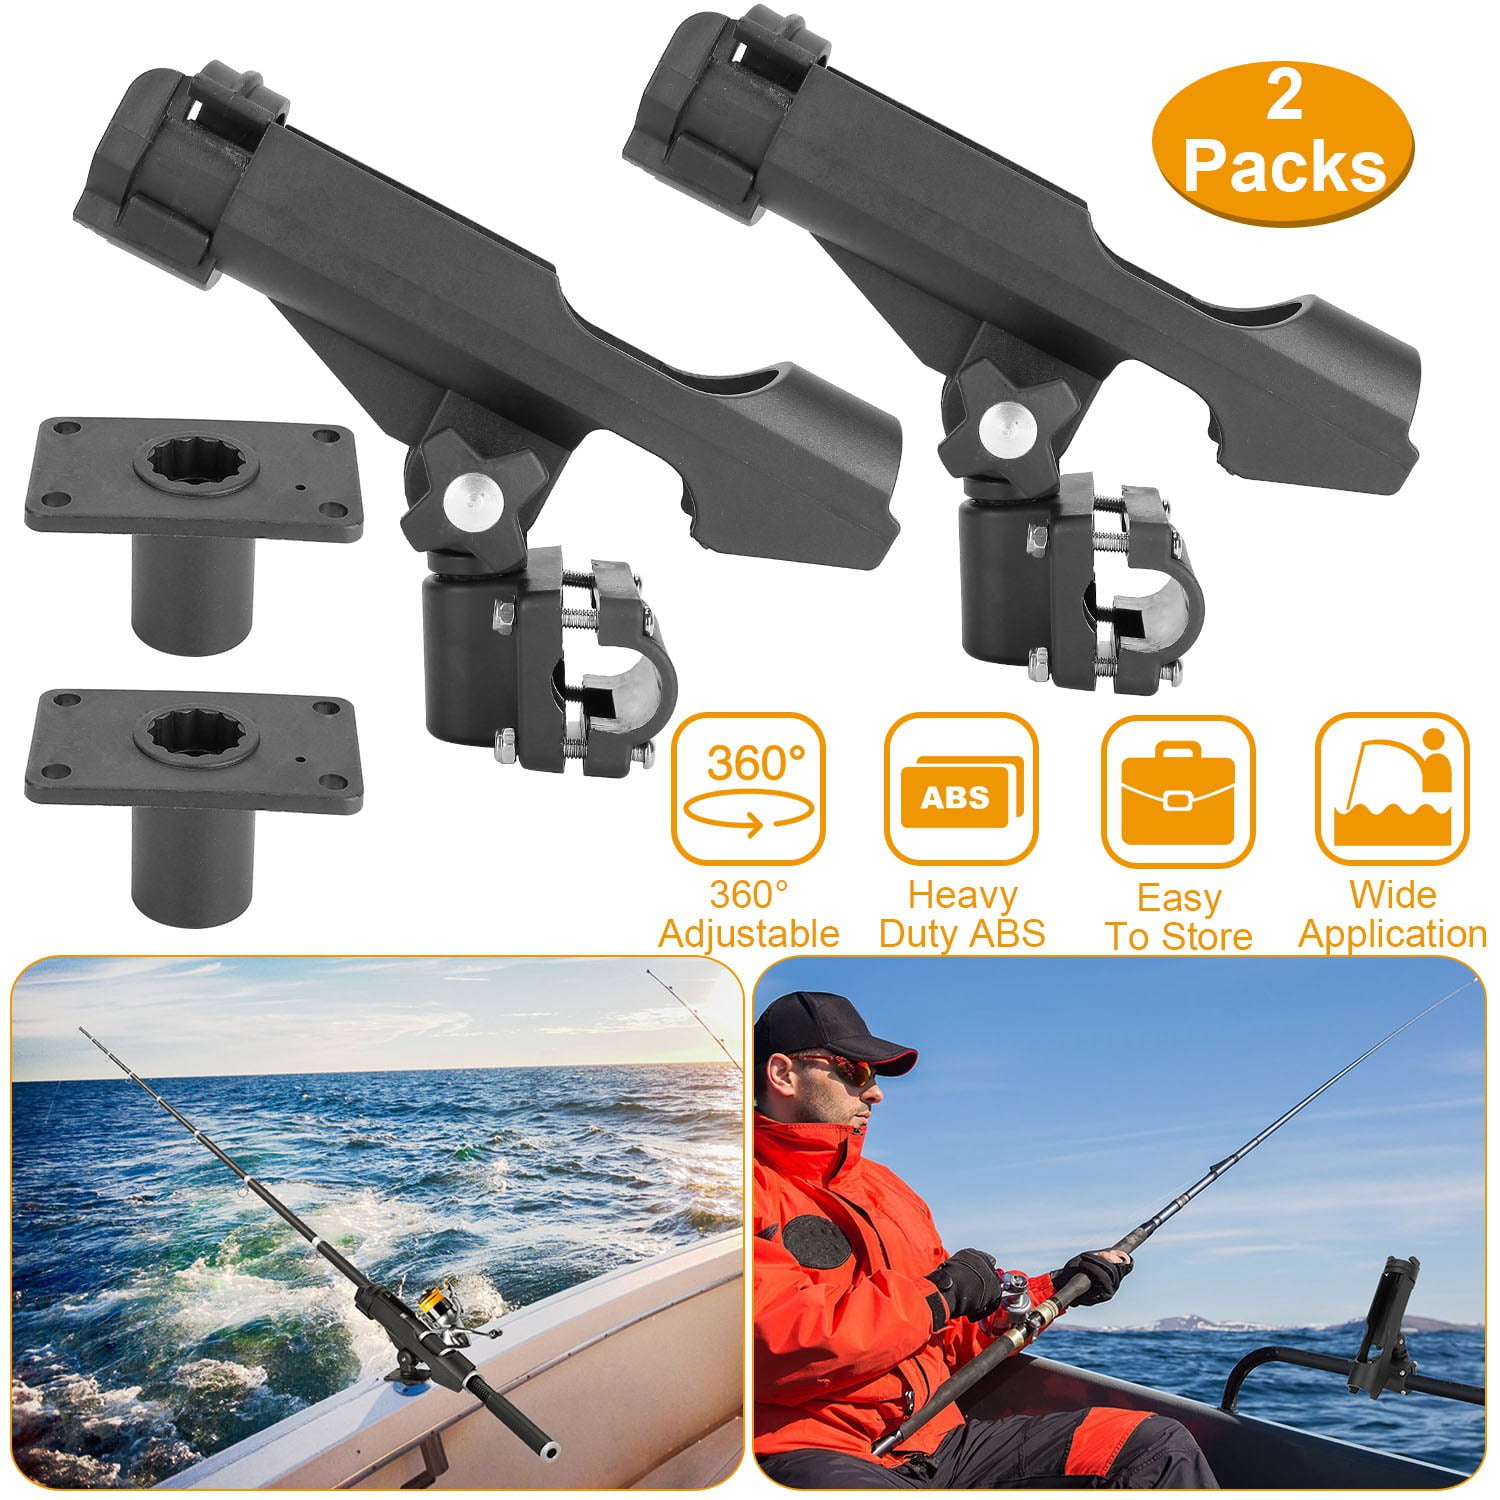 Katydid Fishing Products Single Bay Rod Holder - With or Without Hardware